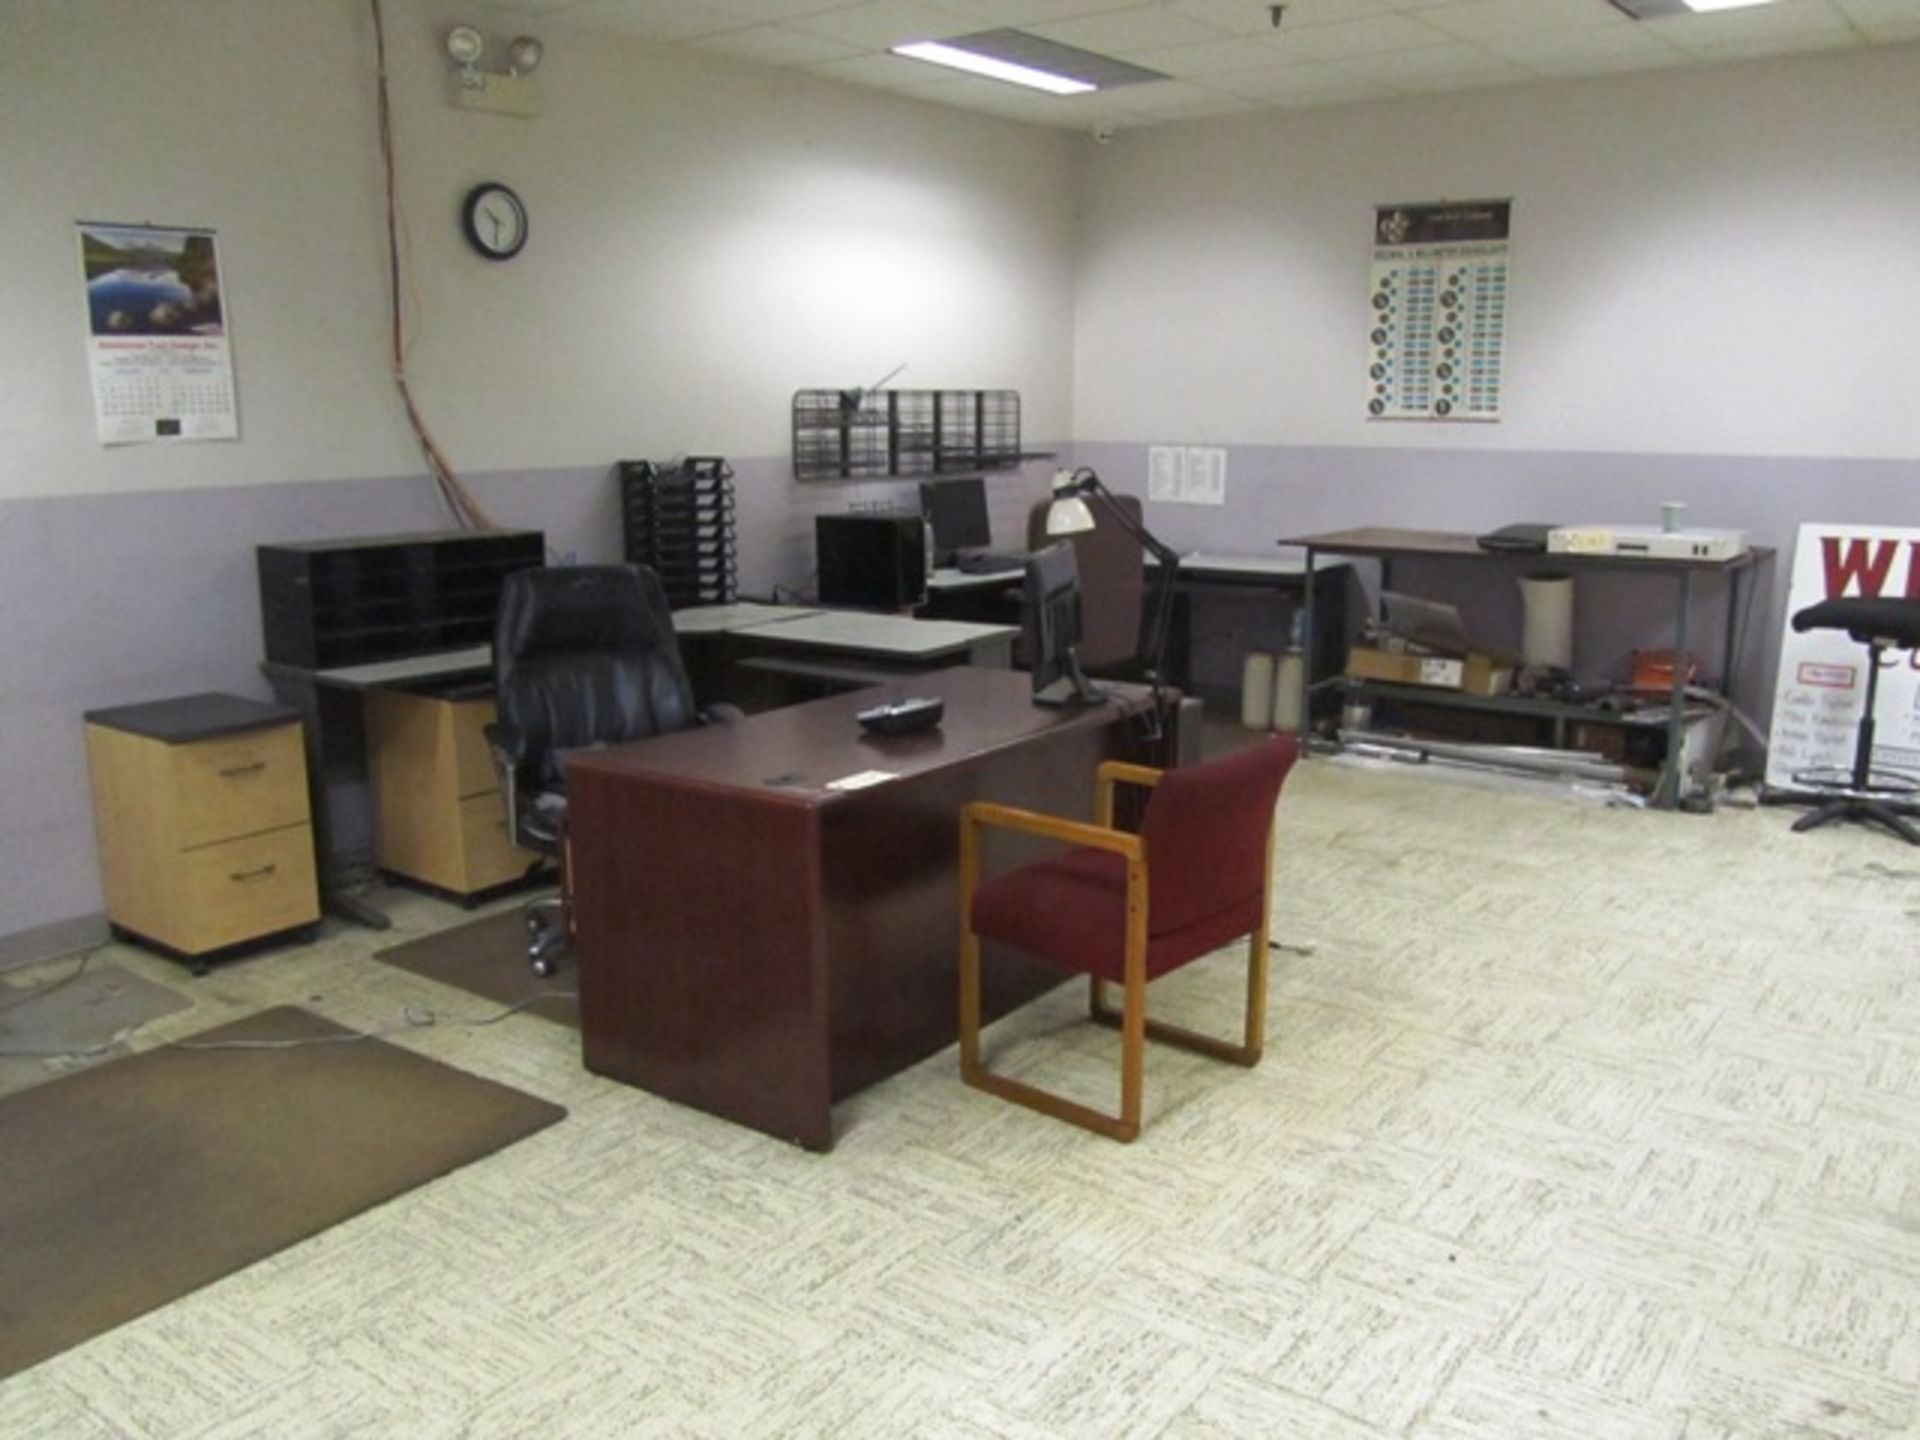 Balance of Office consisting of Desks, Chair, (2) Lateral Cabinets (no computer)